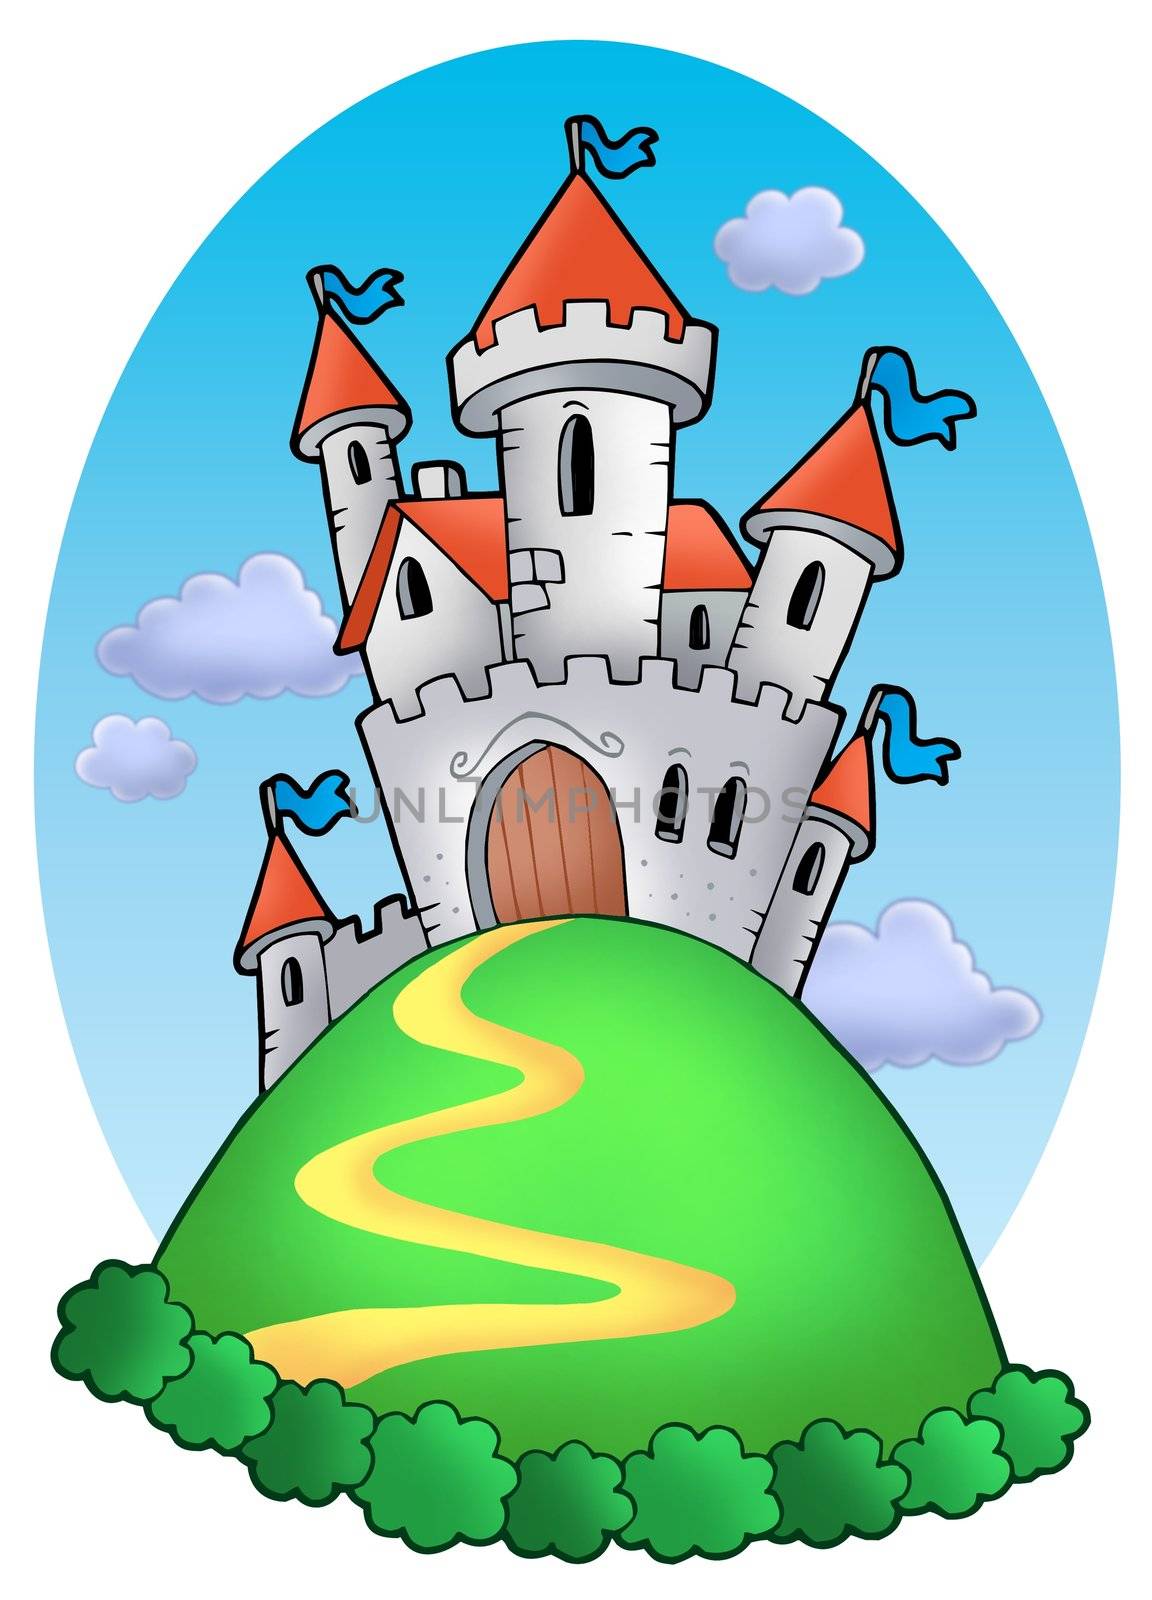 Fairy tale castle with clouds - color illustration.